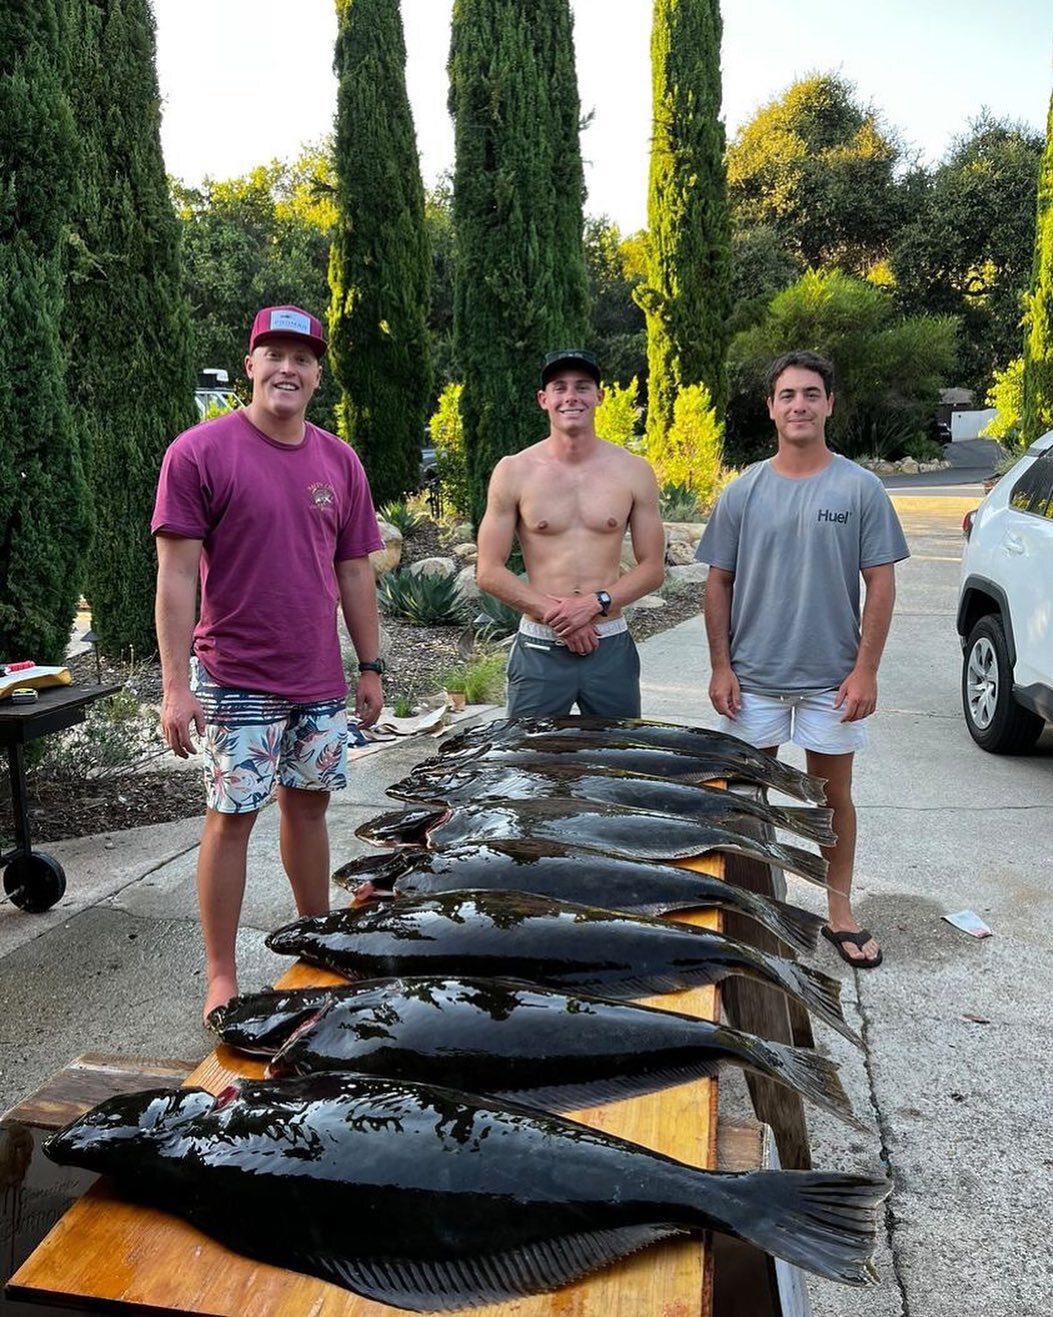 Future fish tacos 🌮 and ceviche!  Island flatties!  Zane Booth, Dominik Stefanou and Stephen Blaauw putting dinner on the table.
#kelptotable #staysalty